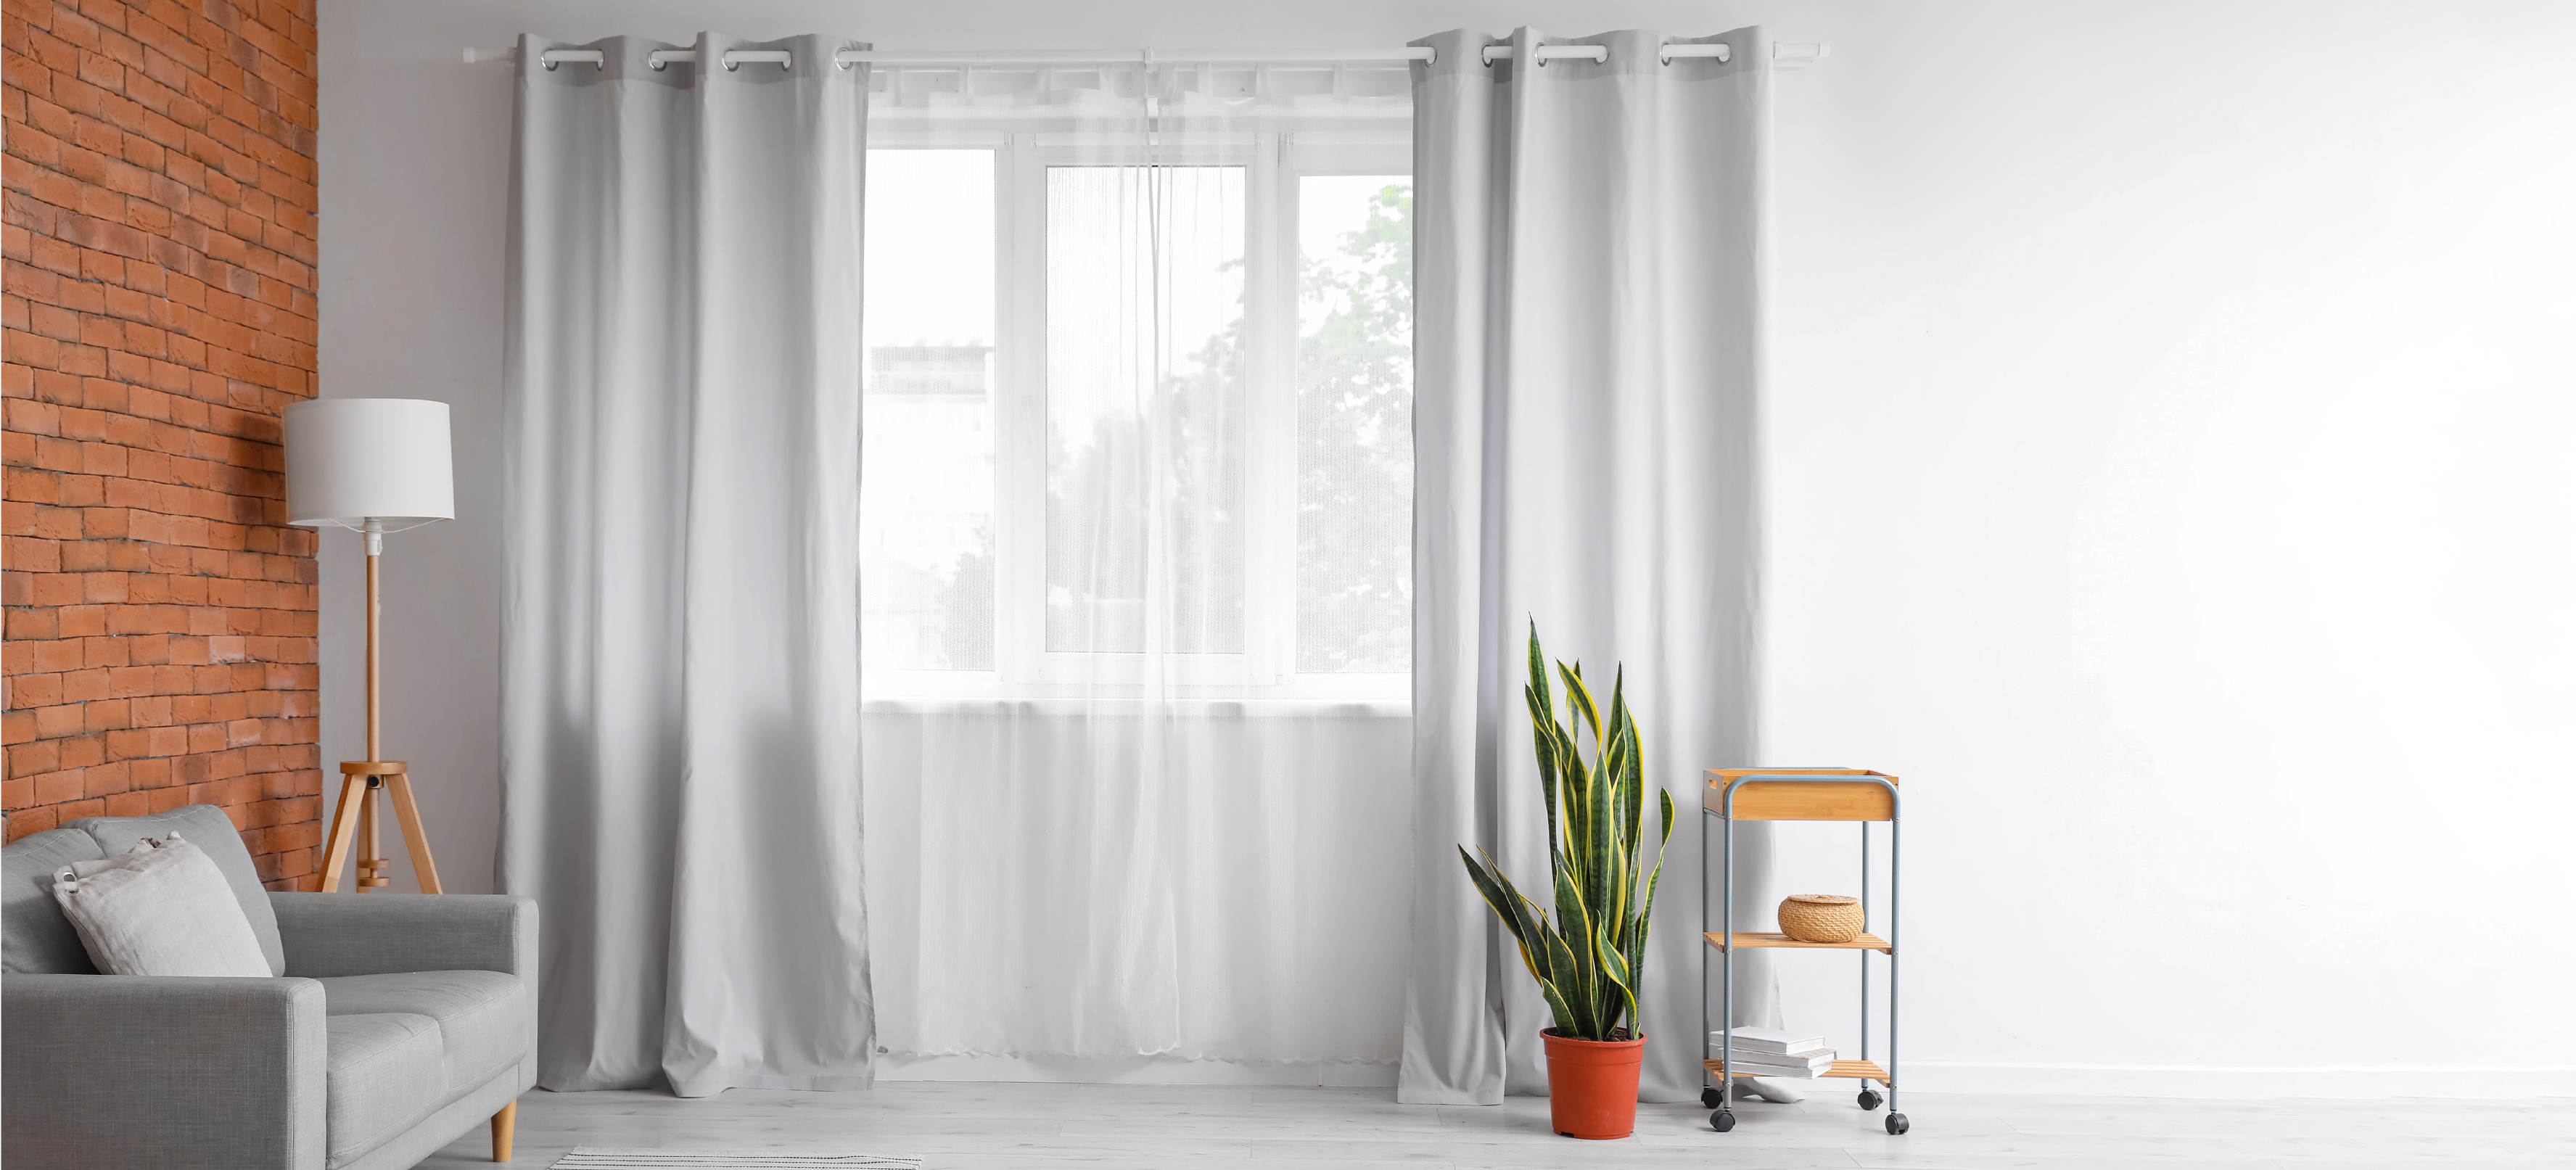 How to choose designer curtains for your bedroom